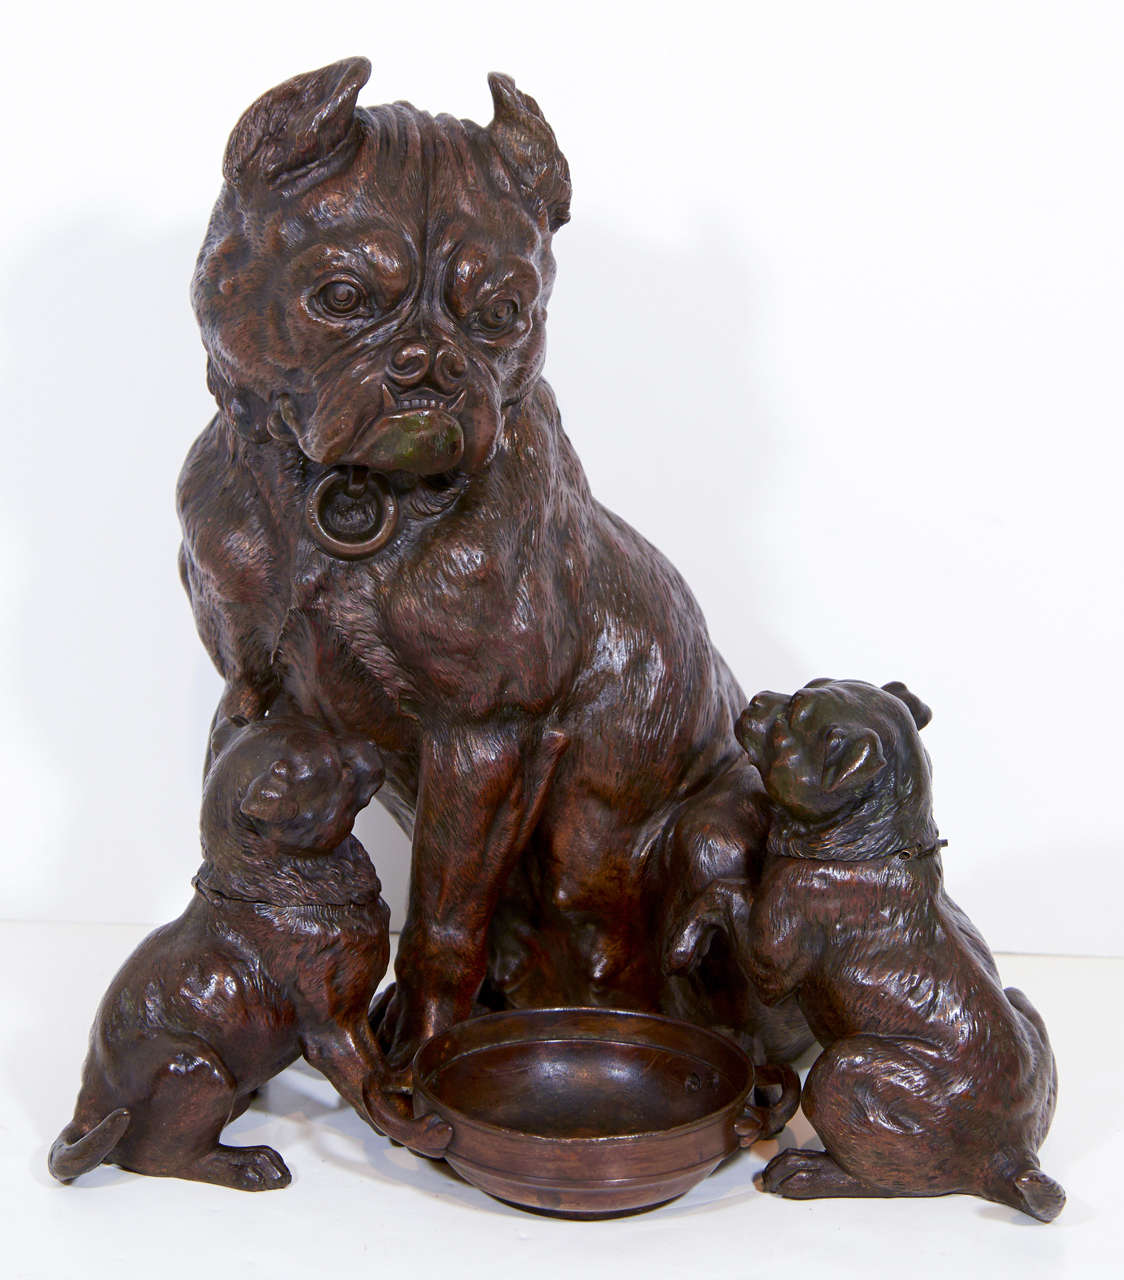 An Austrian 19th century patinated bronze humidor in the shape of a bulldog with two puppies. The piece is in good vintage condition with age appropriate patina.